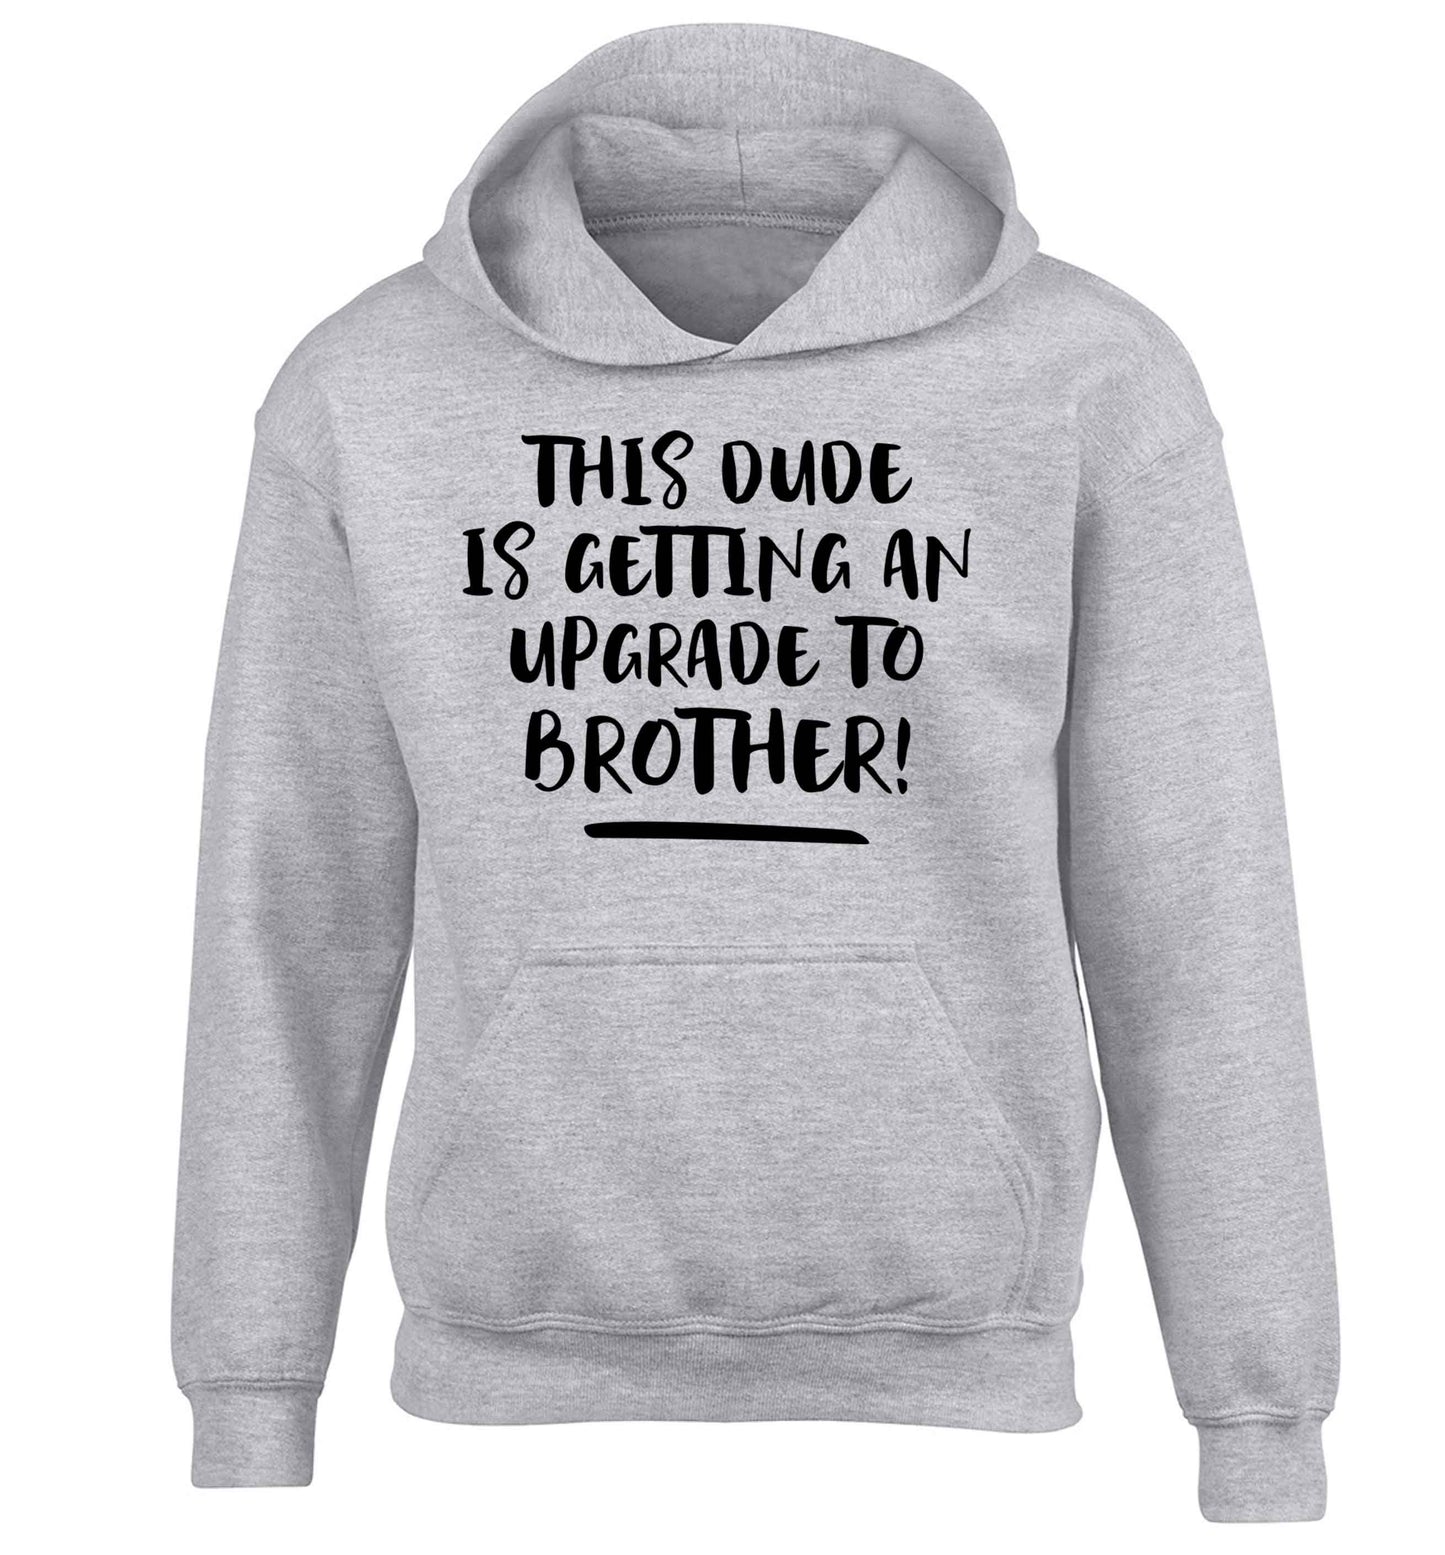 This dude is getting an upgrade to brother! children's grey hoodie 12-13 Years